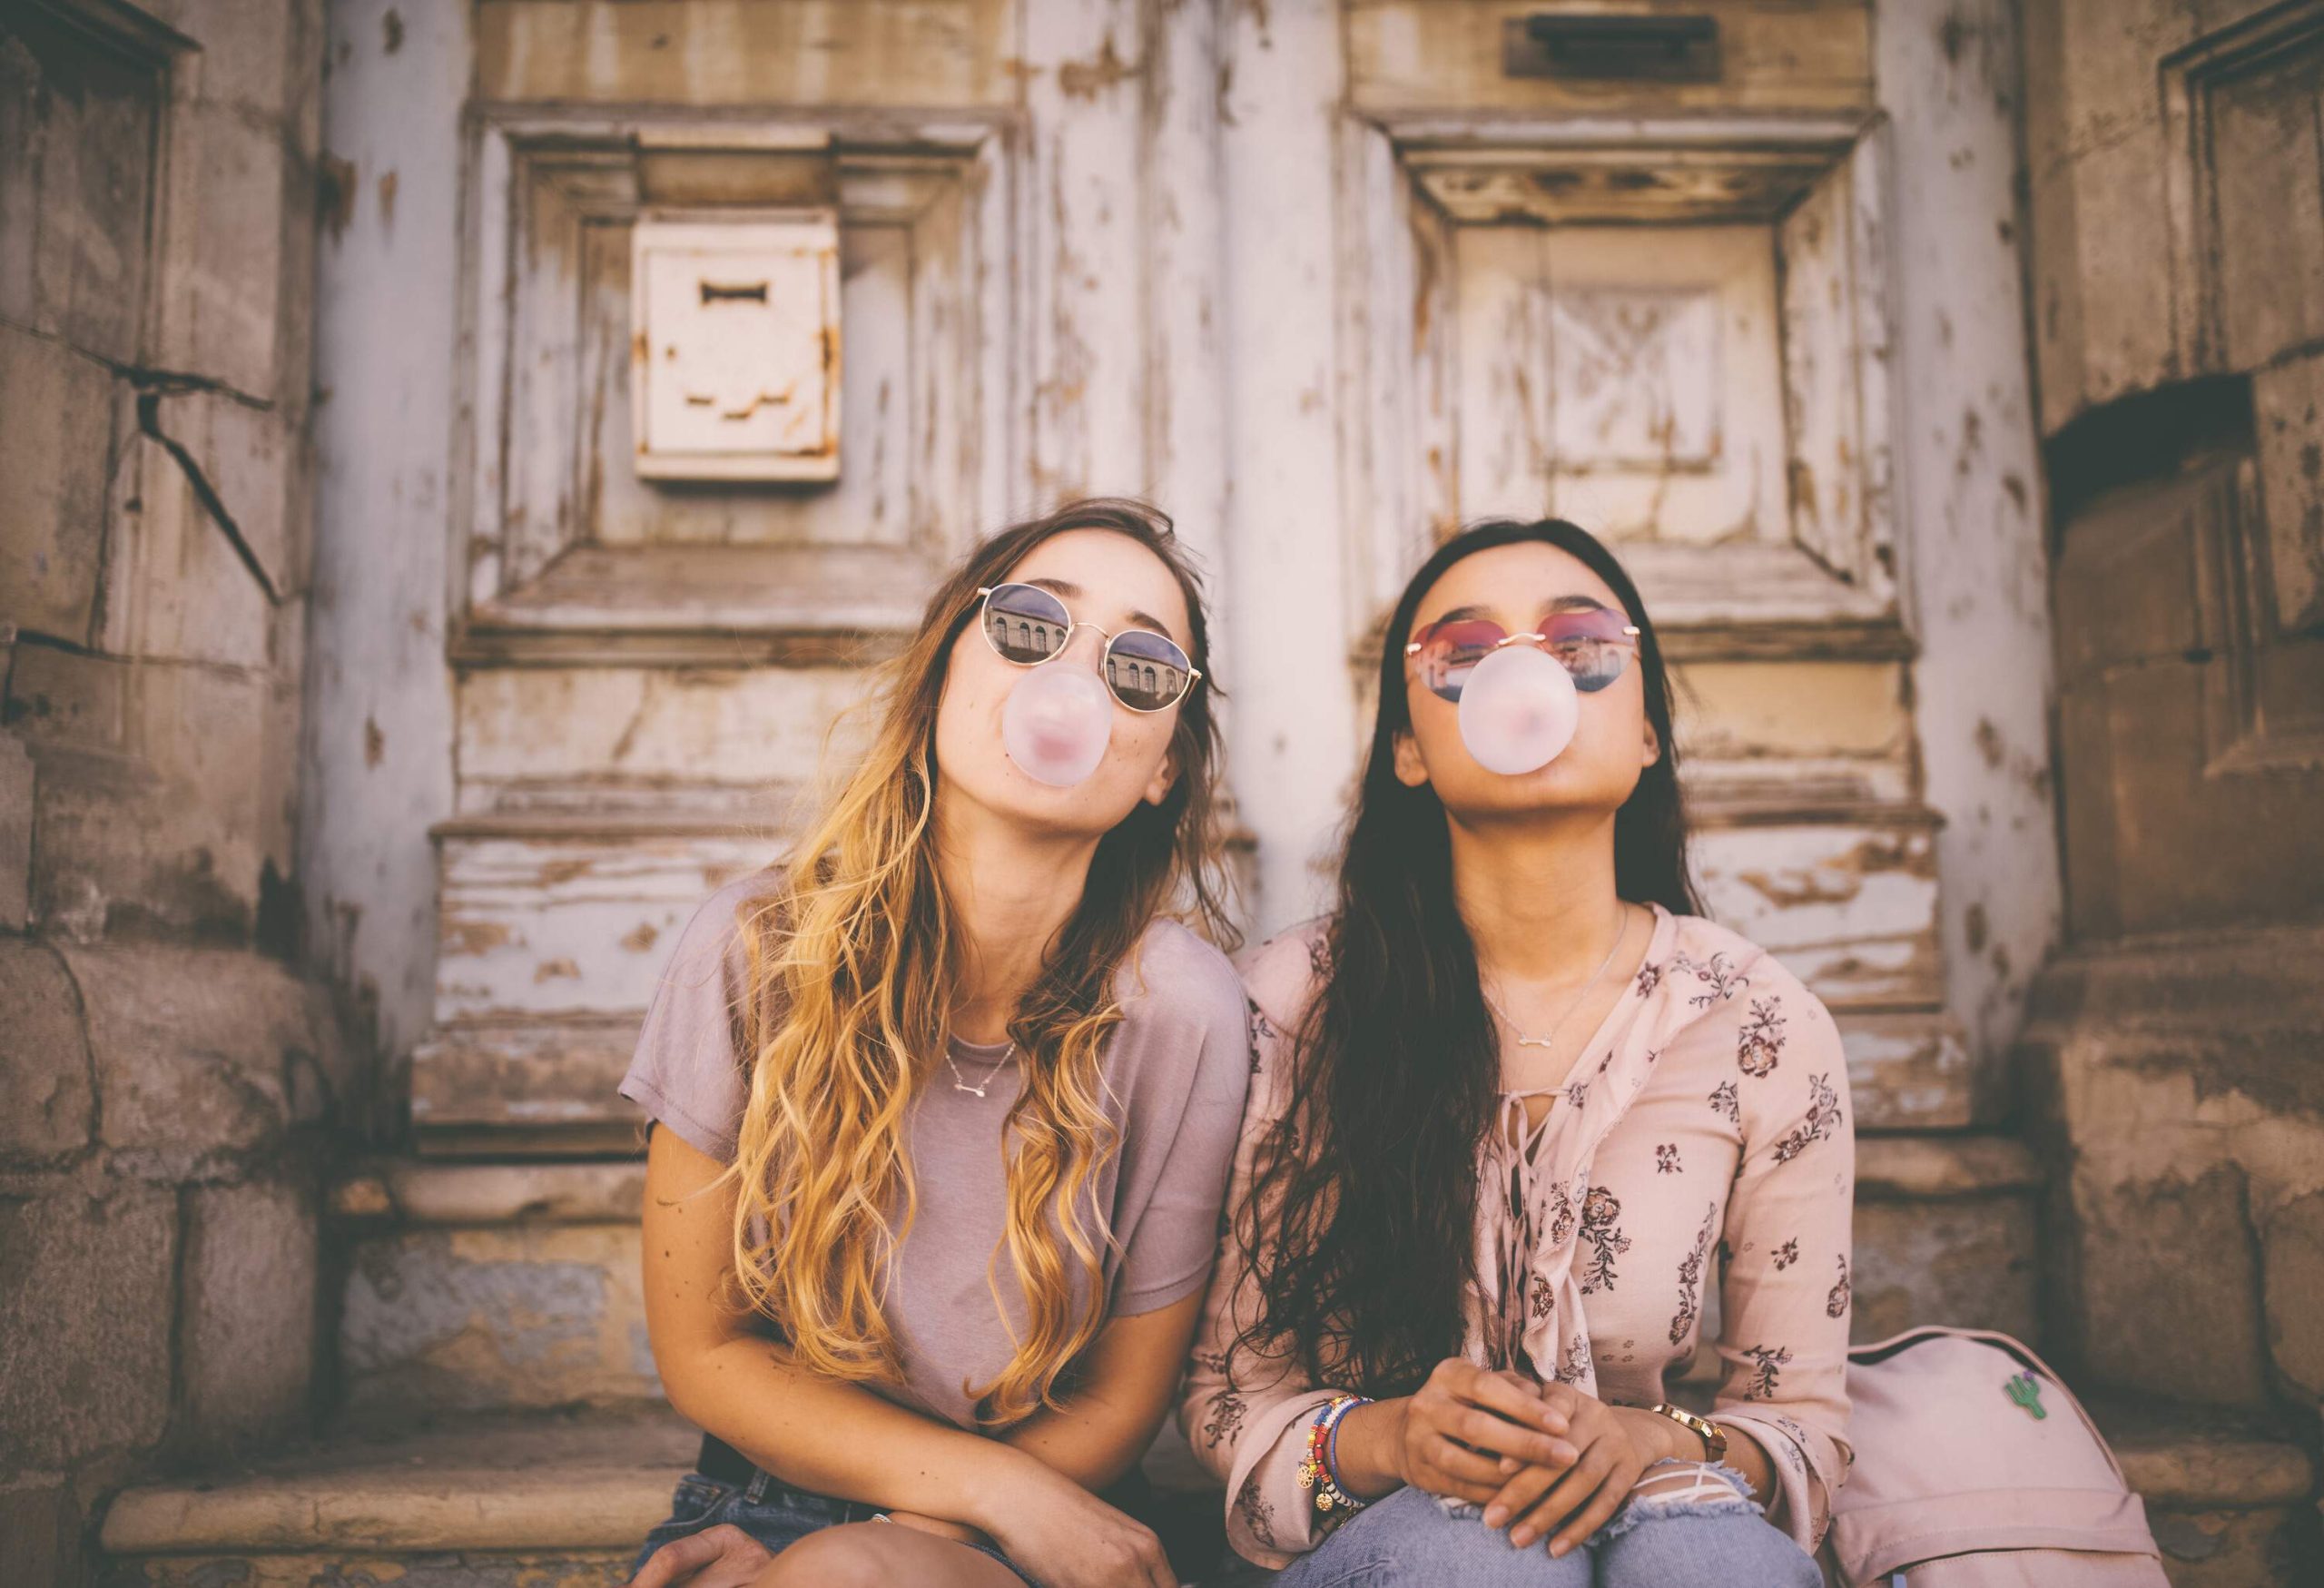 Two women in casual clothes and sunglasses sit beside each other as they blow bubbles with gum.